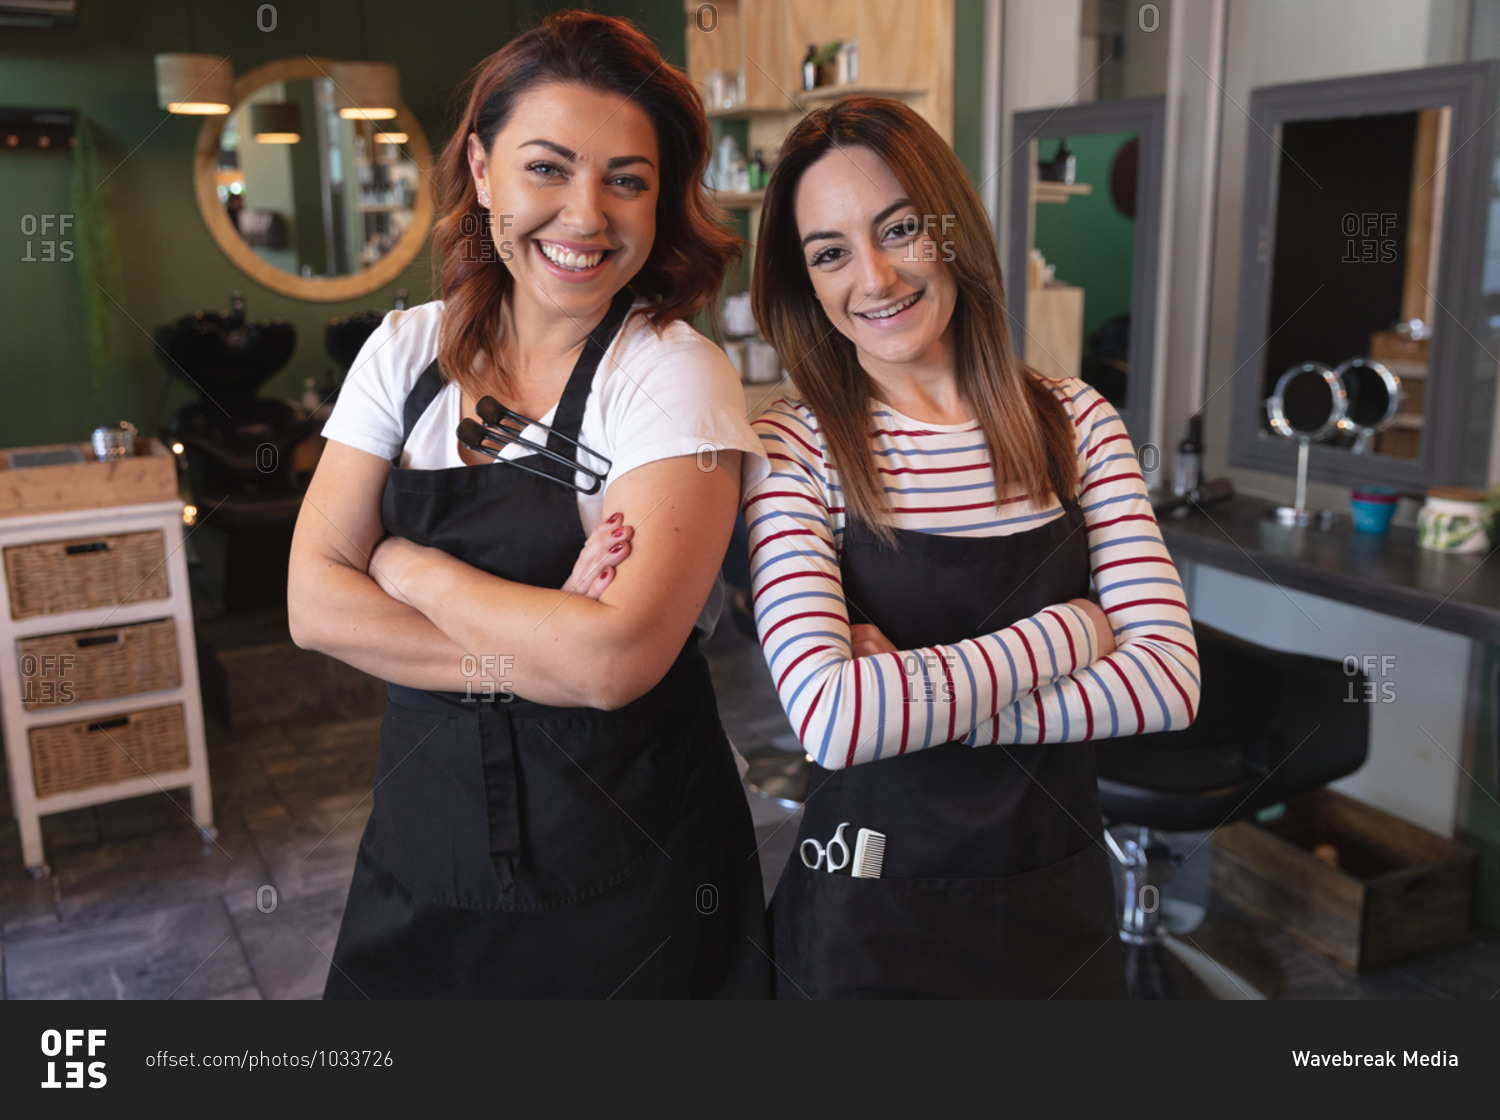 Portrait of two Caucasian female hairdressers working in hair salon, posing for a picture with their arms crossed. Health and hygiene in workplace during Coronavirus Covid 19 pandemic.